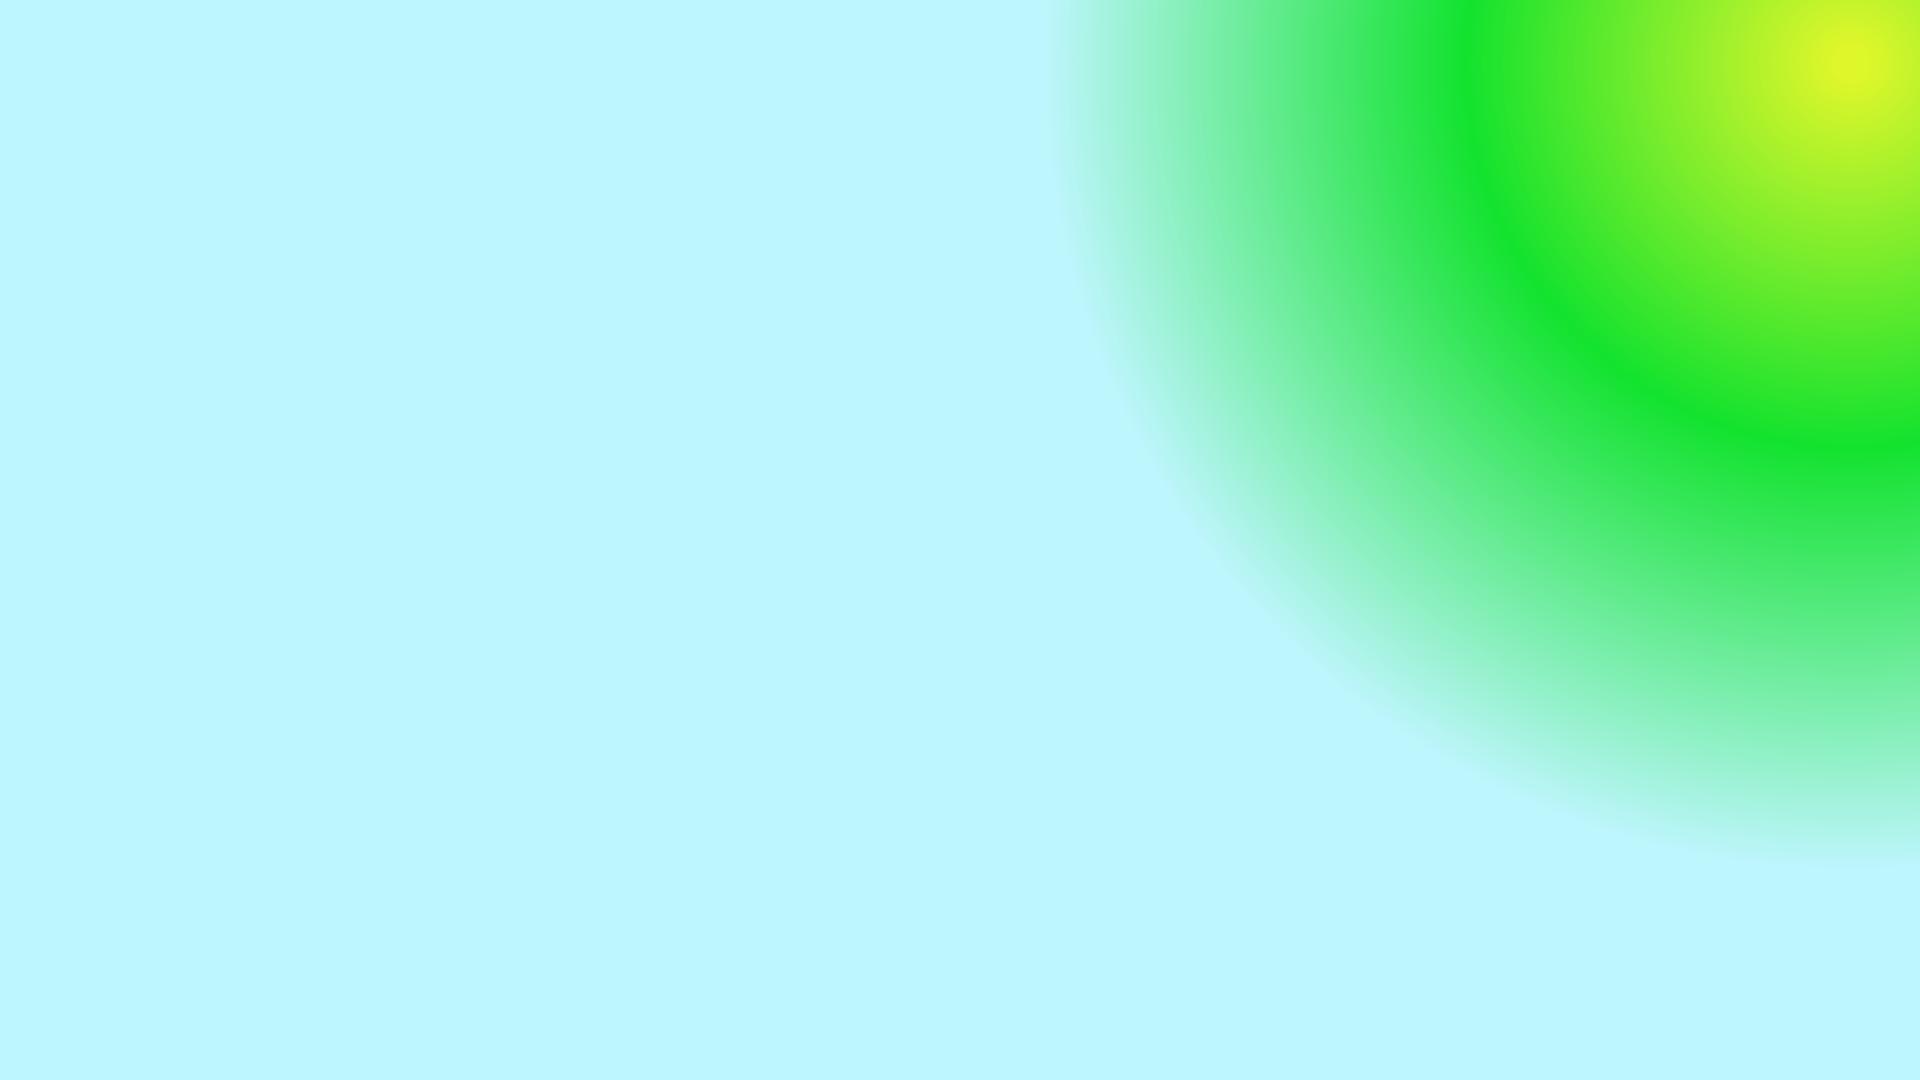 blue to yellow green Gradient